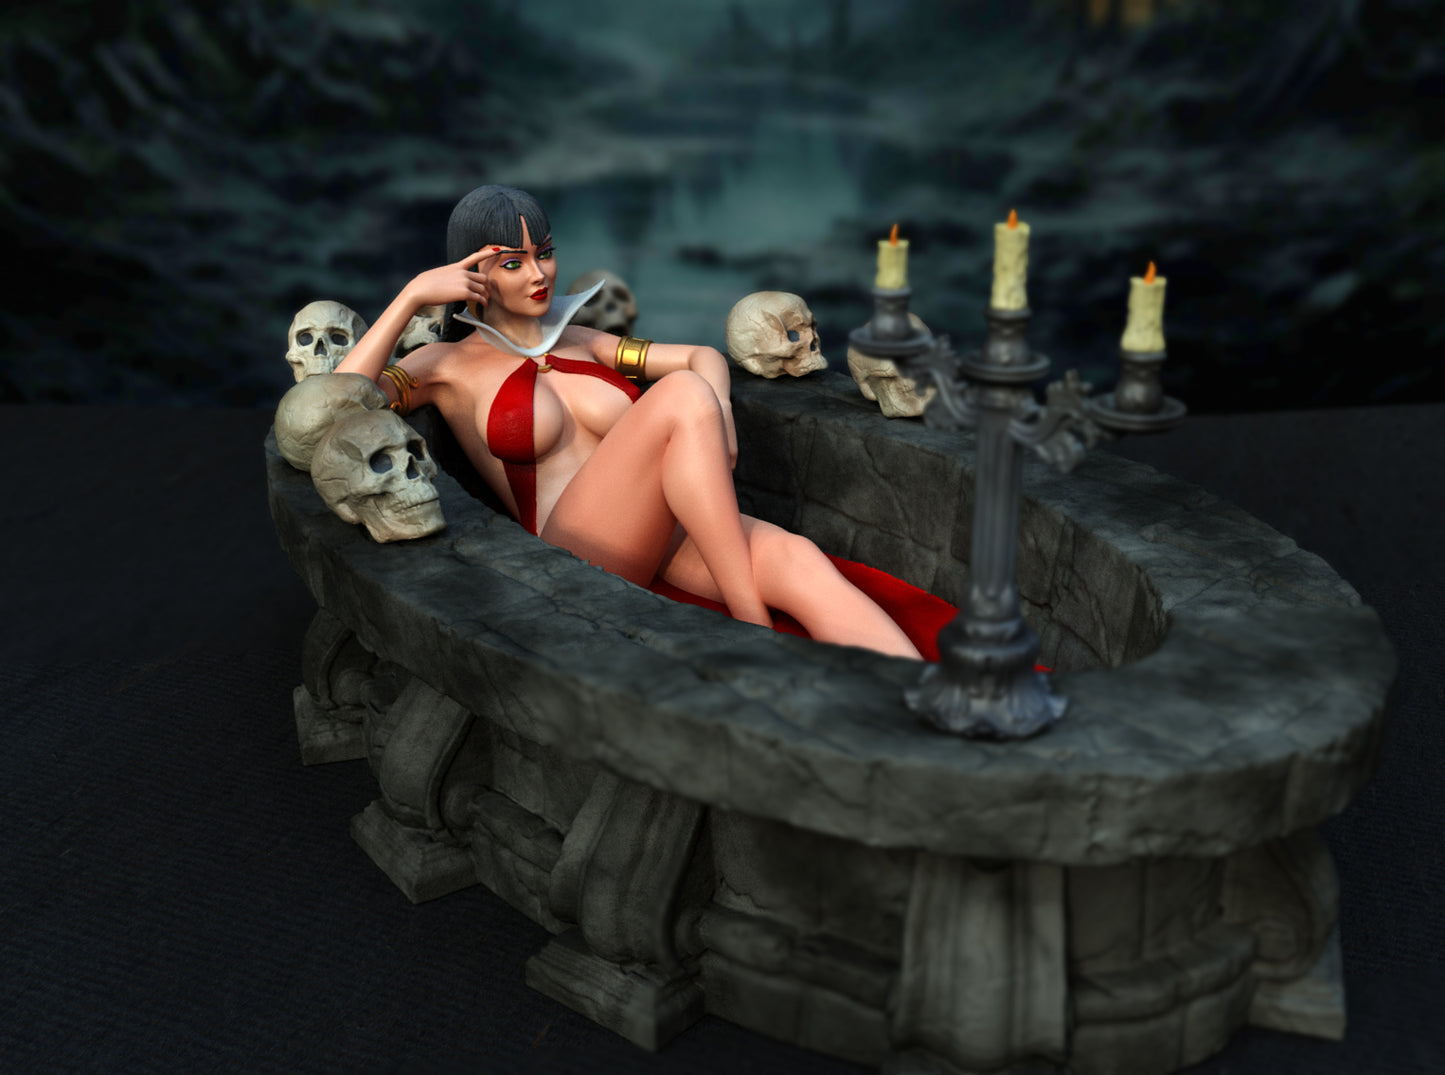 Vampirella Pin-up style Figurine Model Kit for collecting, building and painting for Adults